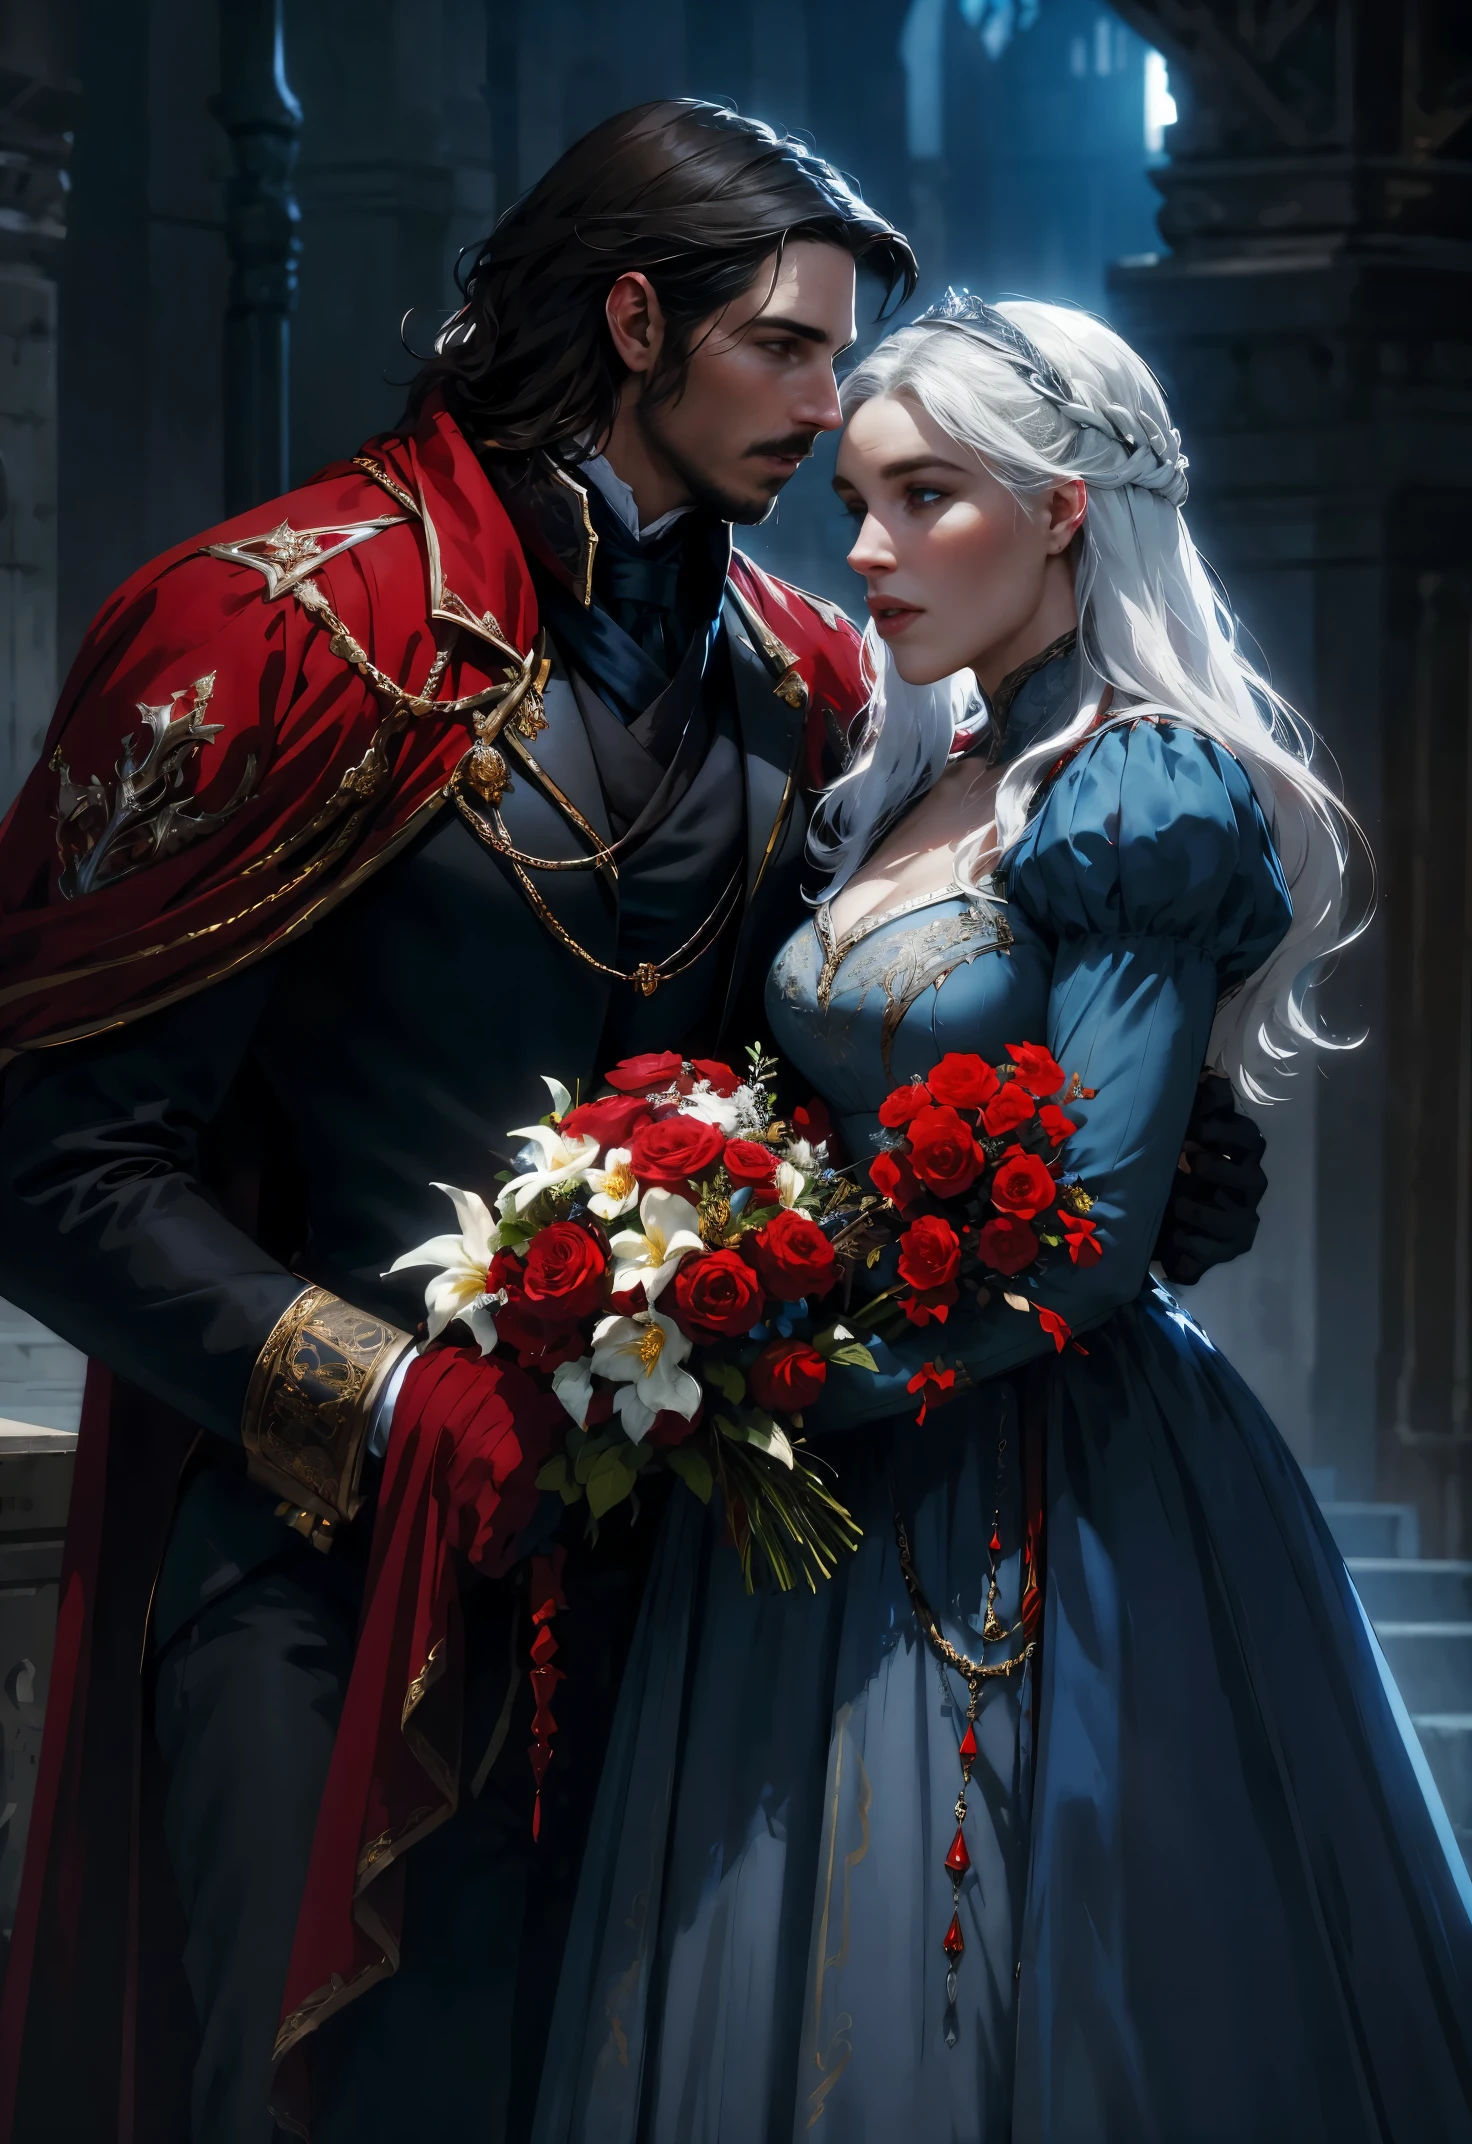 fantasy, red, black, blue and white tones, flowers, a man and a woman kissing each other, a man looks like Christian Bale, in a royal uniform of the 19th century, a woman looks like Daenerys, in a royal dress of the 19th century, hd